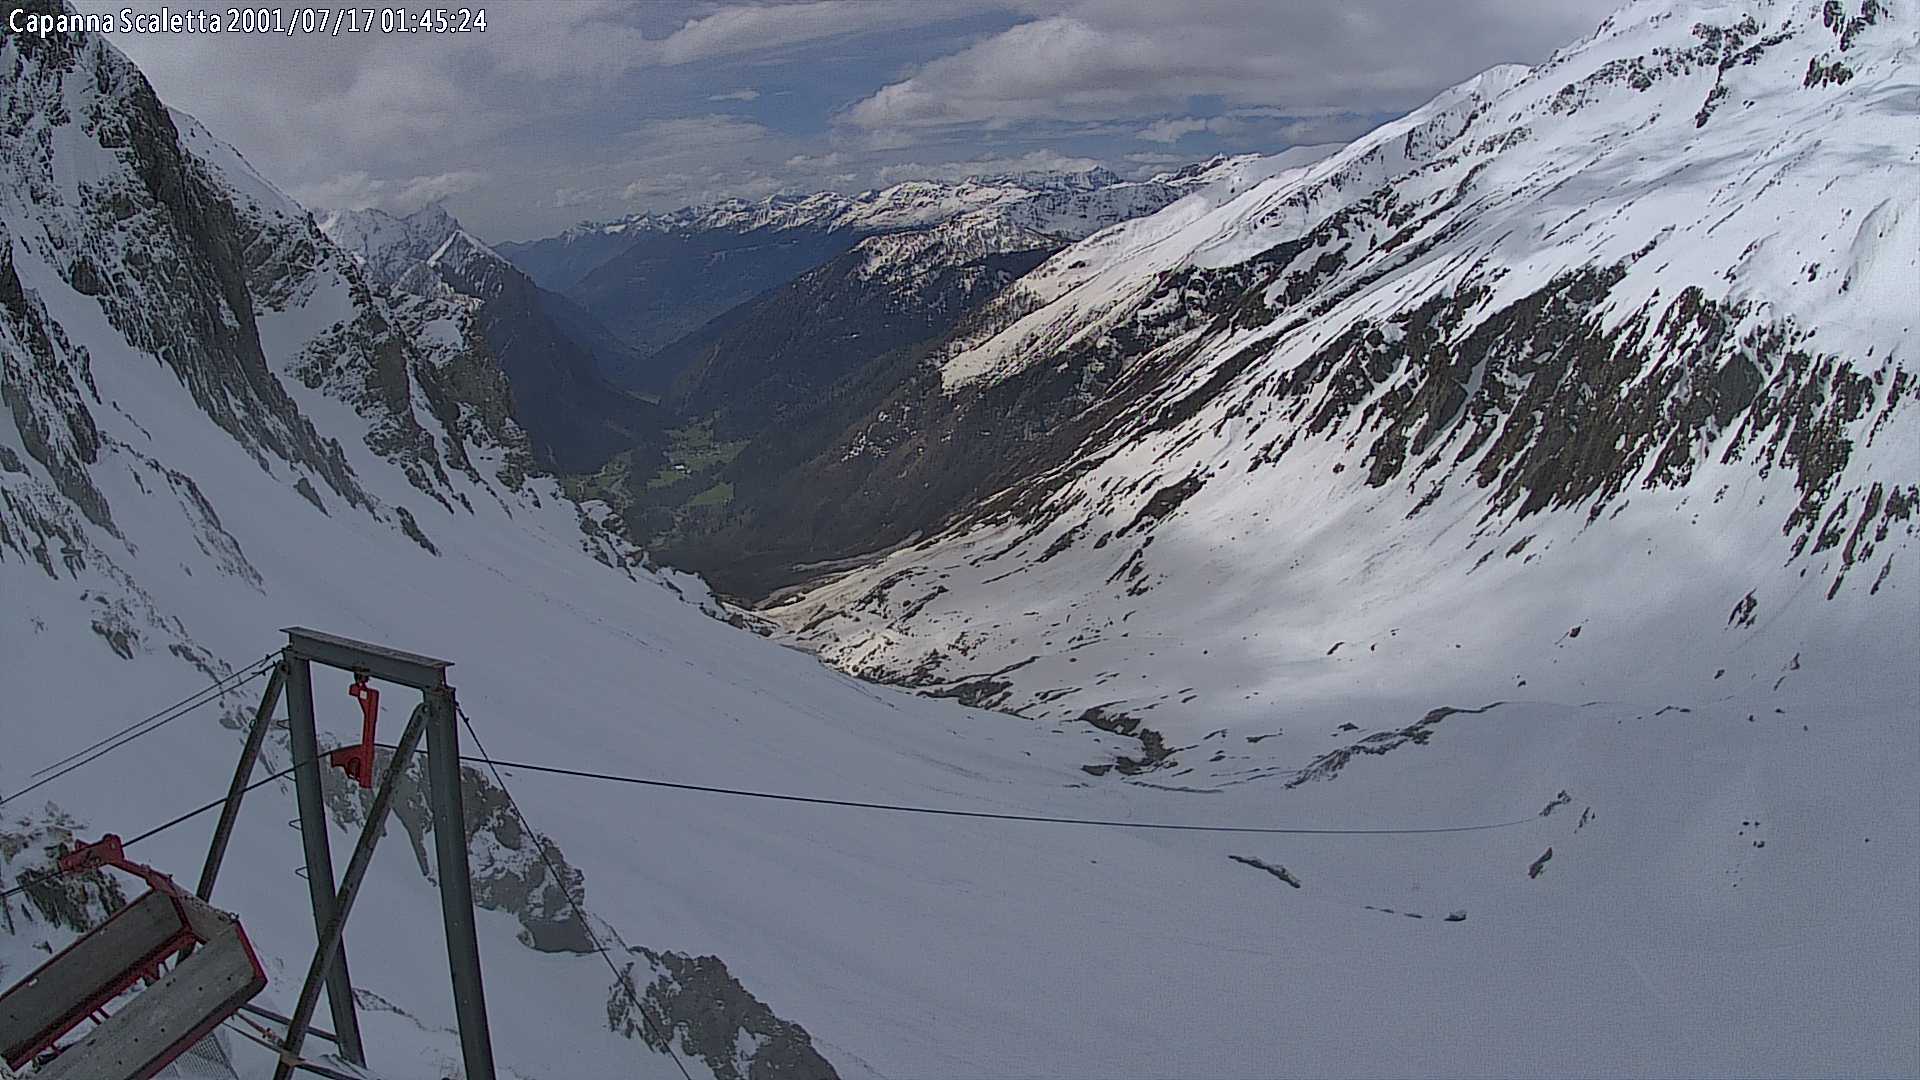 Looking from Scaletta Hut to the south